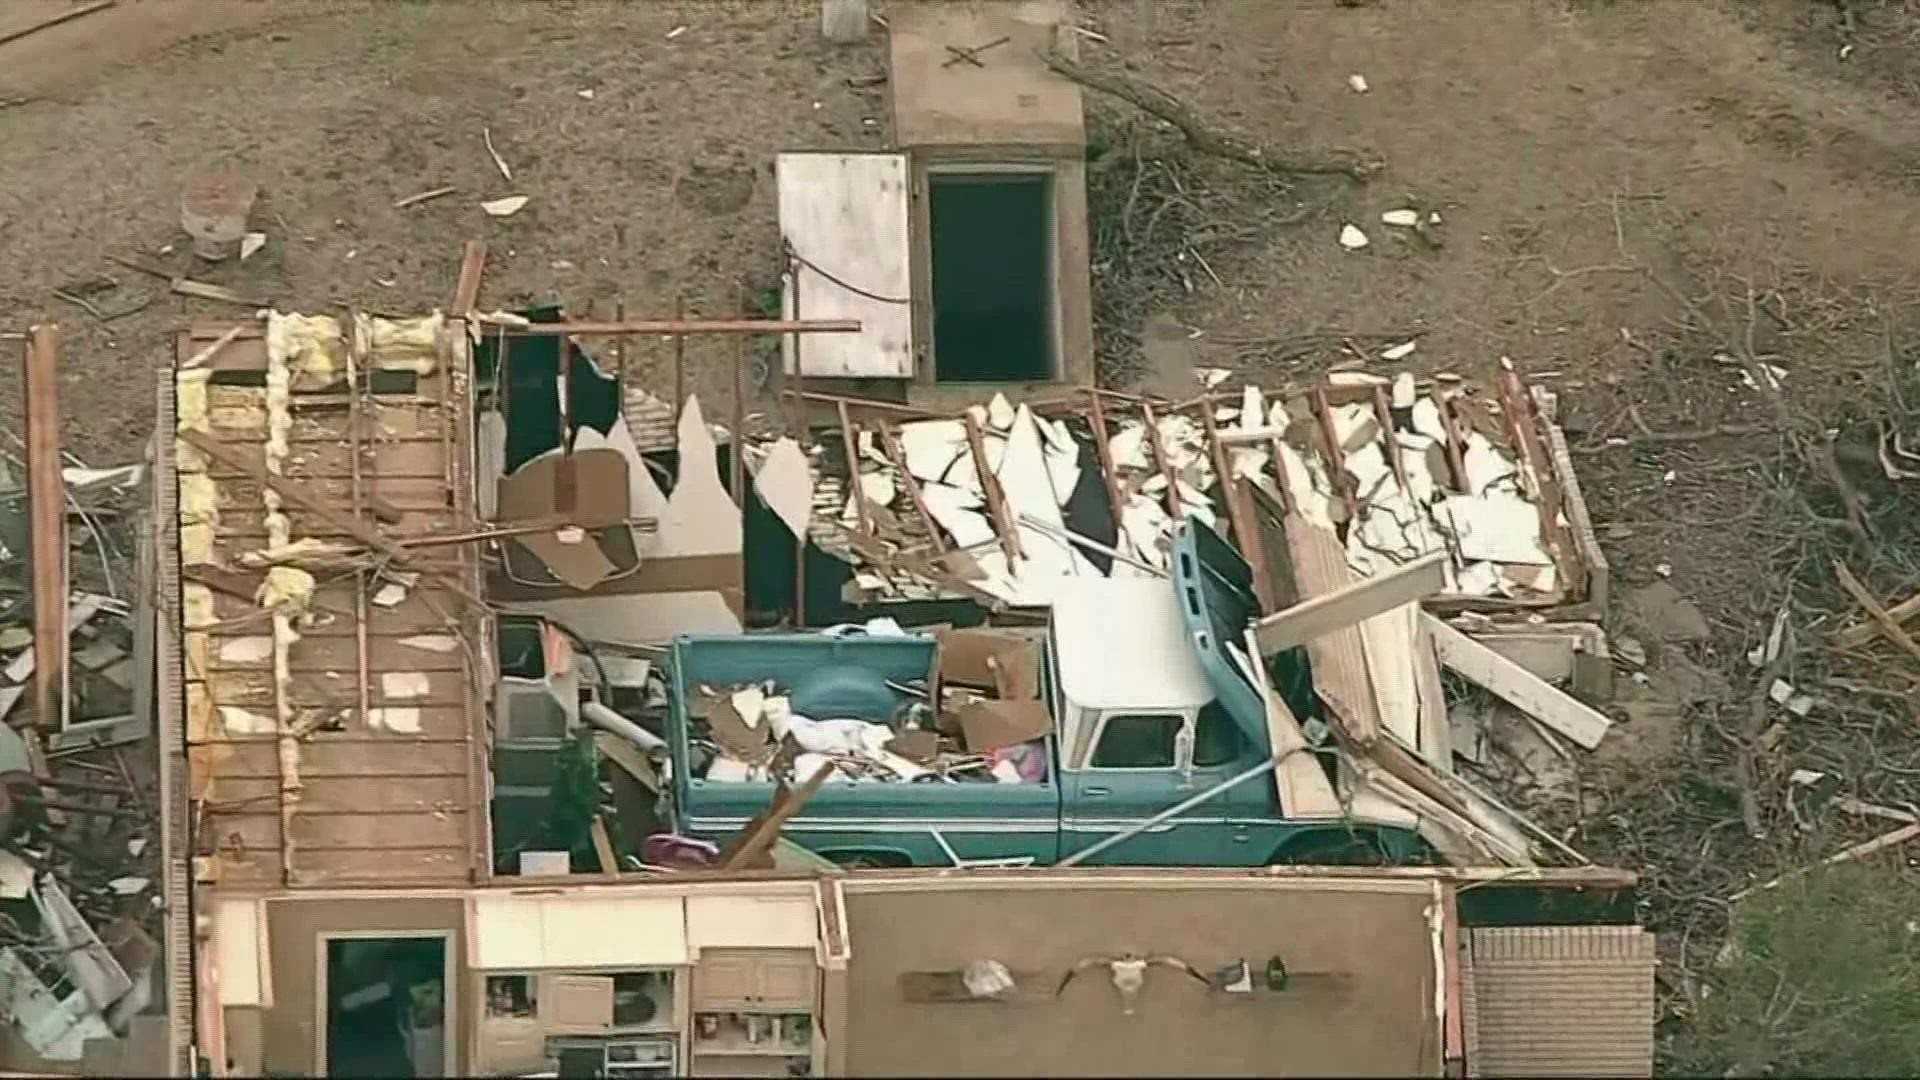 North Texas communities were devastated by an apparent tornado. Aerials showed a house with the roof ripped off and a pickup truck in the middle of the debris.